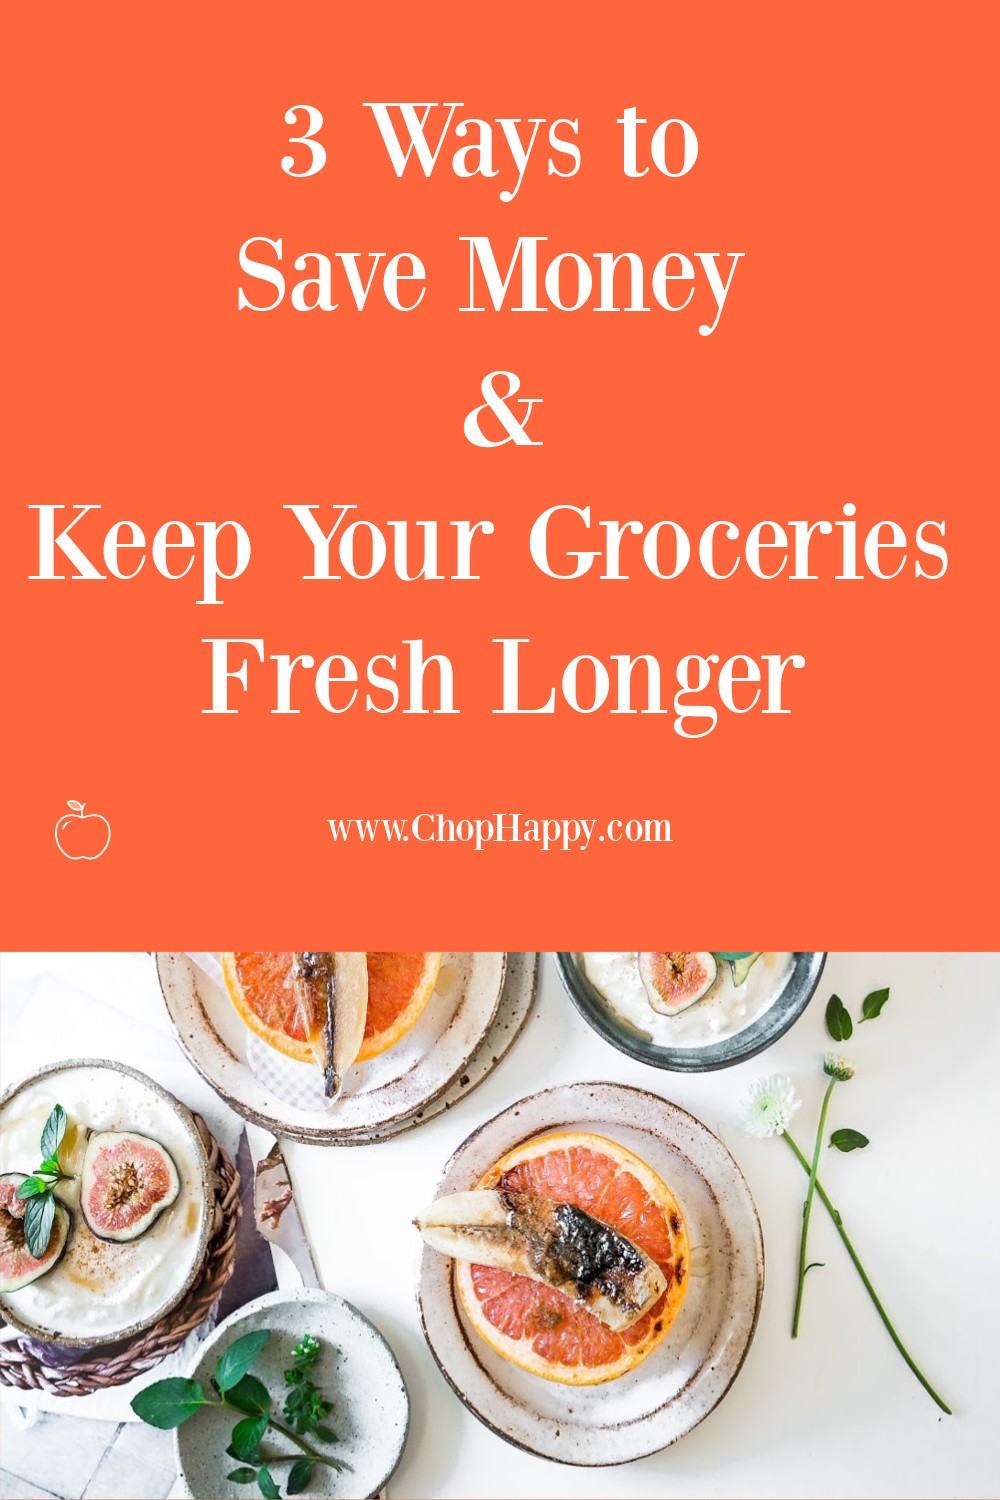 3 Ways to Save Money and Keep Your Groceries Fresh Longer. Here is 3 easy tools from Amazon that will make your veggies and meats last longer. www.ChopHappy.com #savemoney #veggies